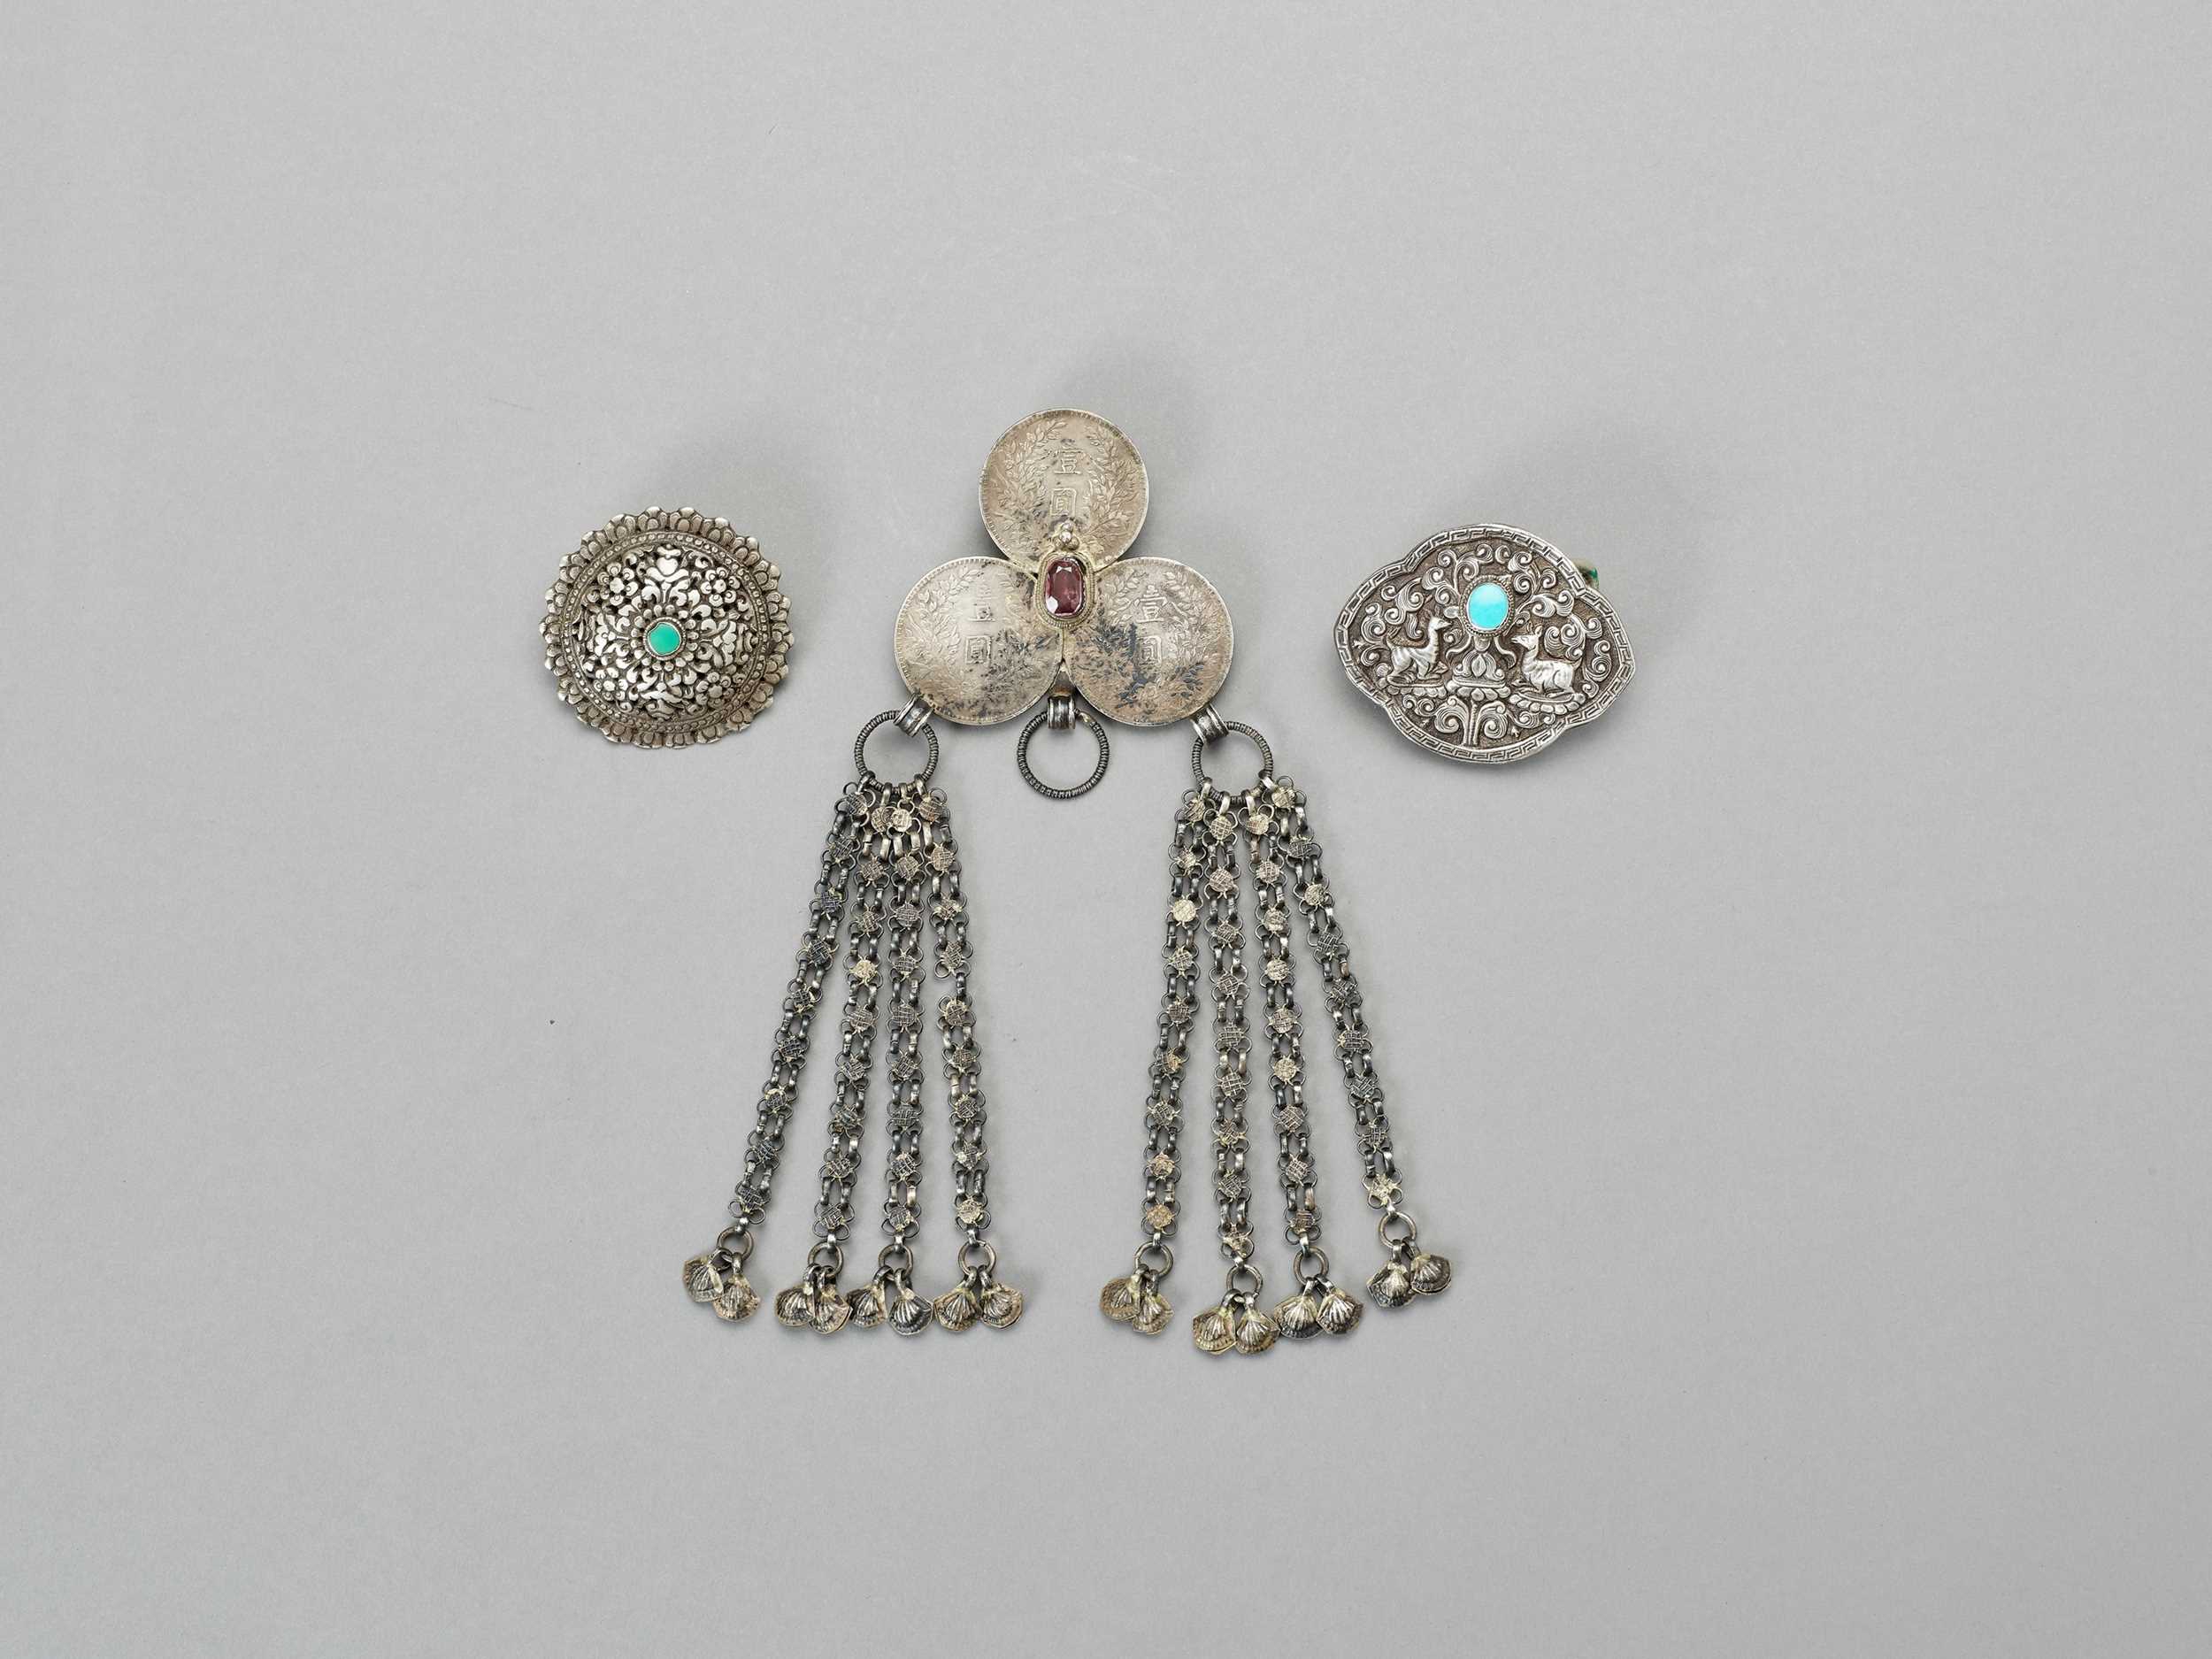 Lot 894 - A GROUP OF THREE SILVER AND SILVER-PLATE BELT ORNAMENTS